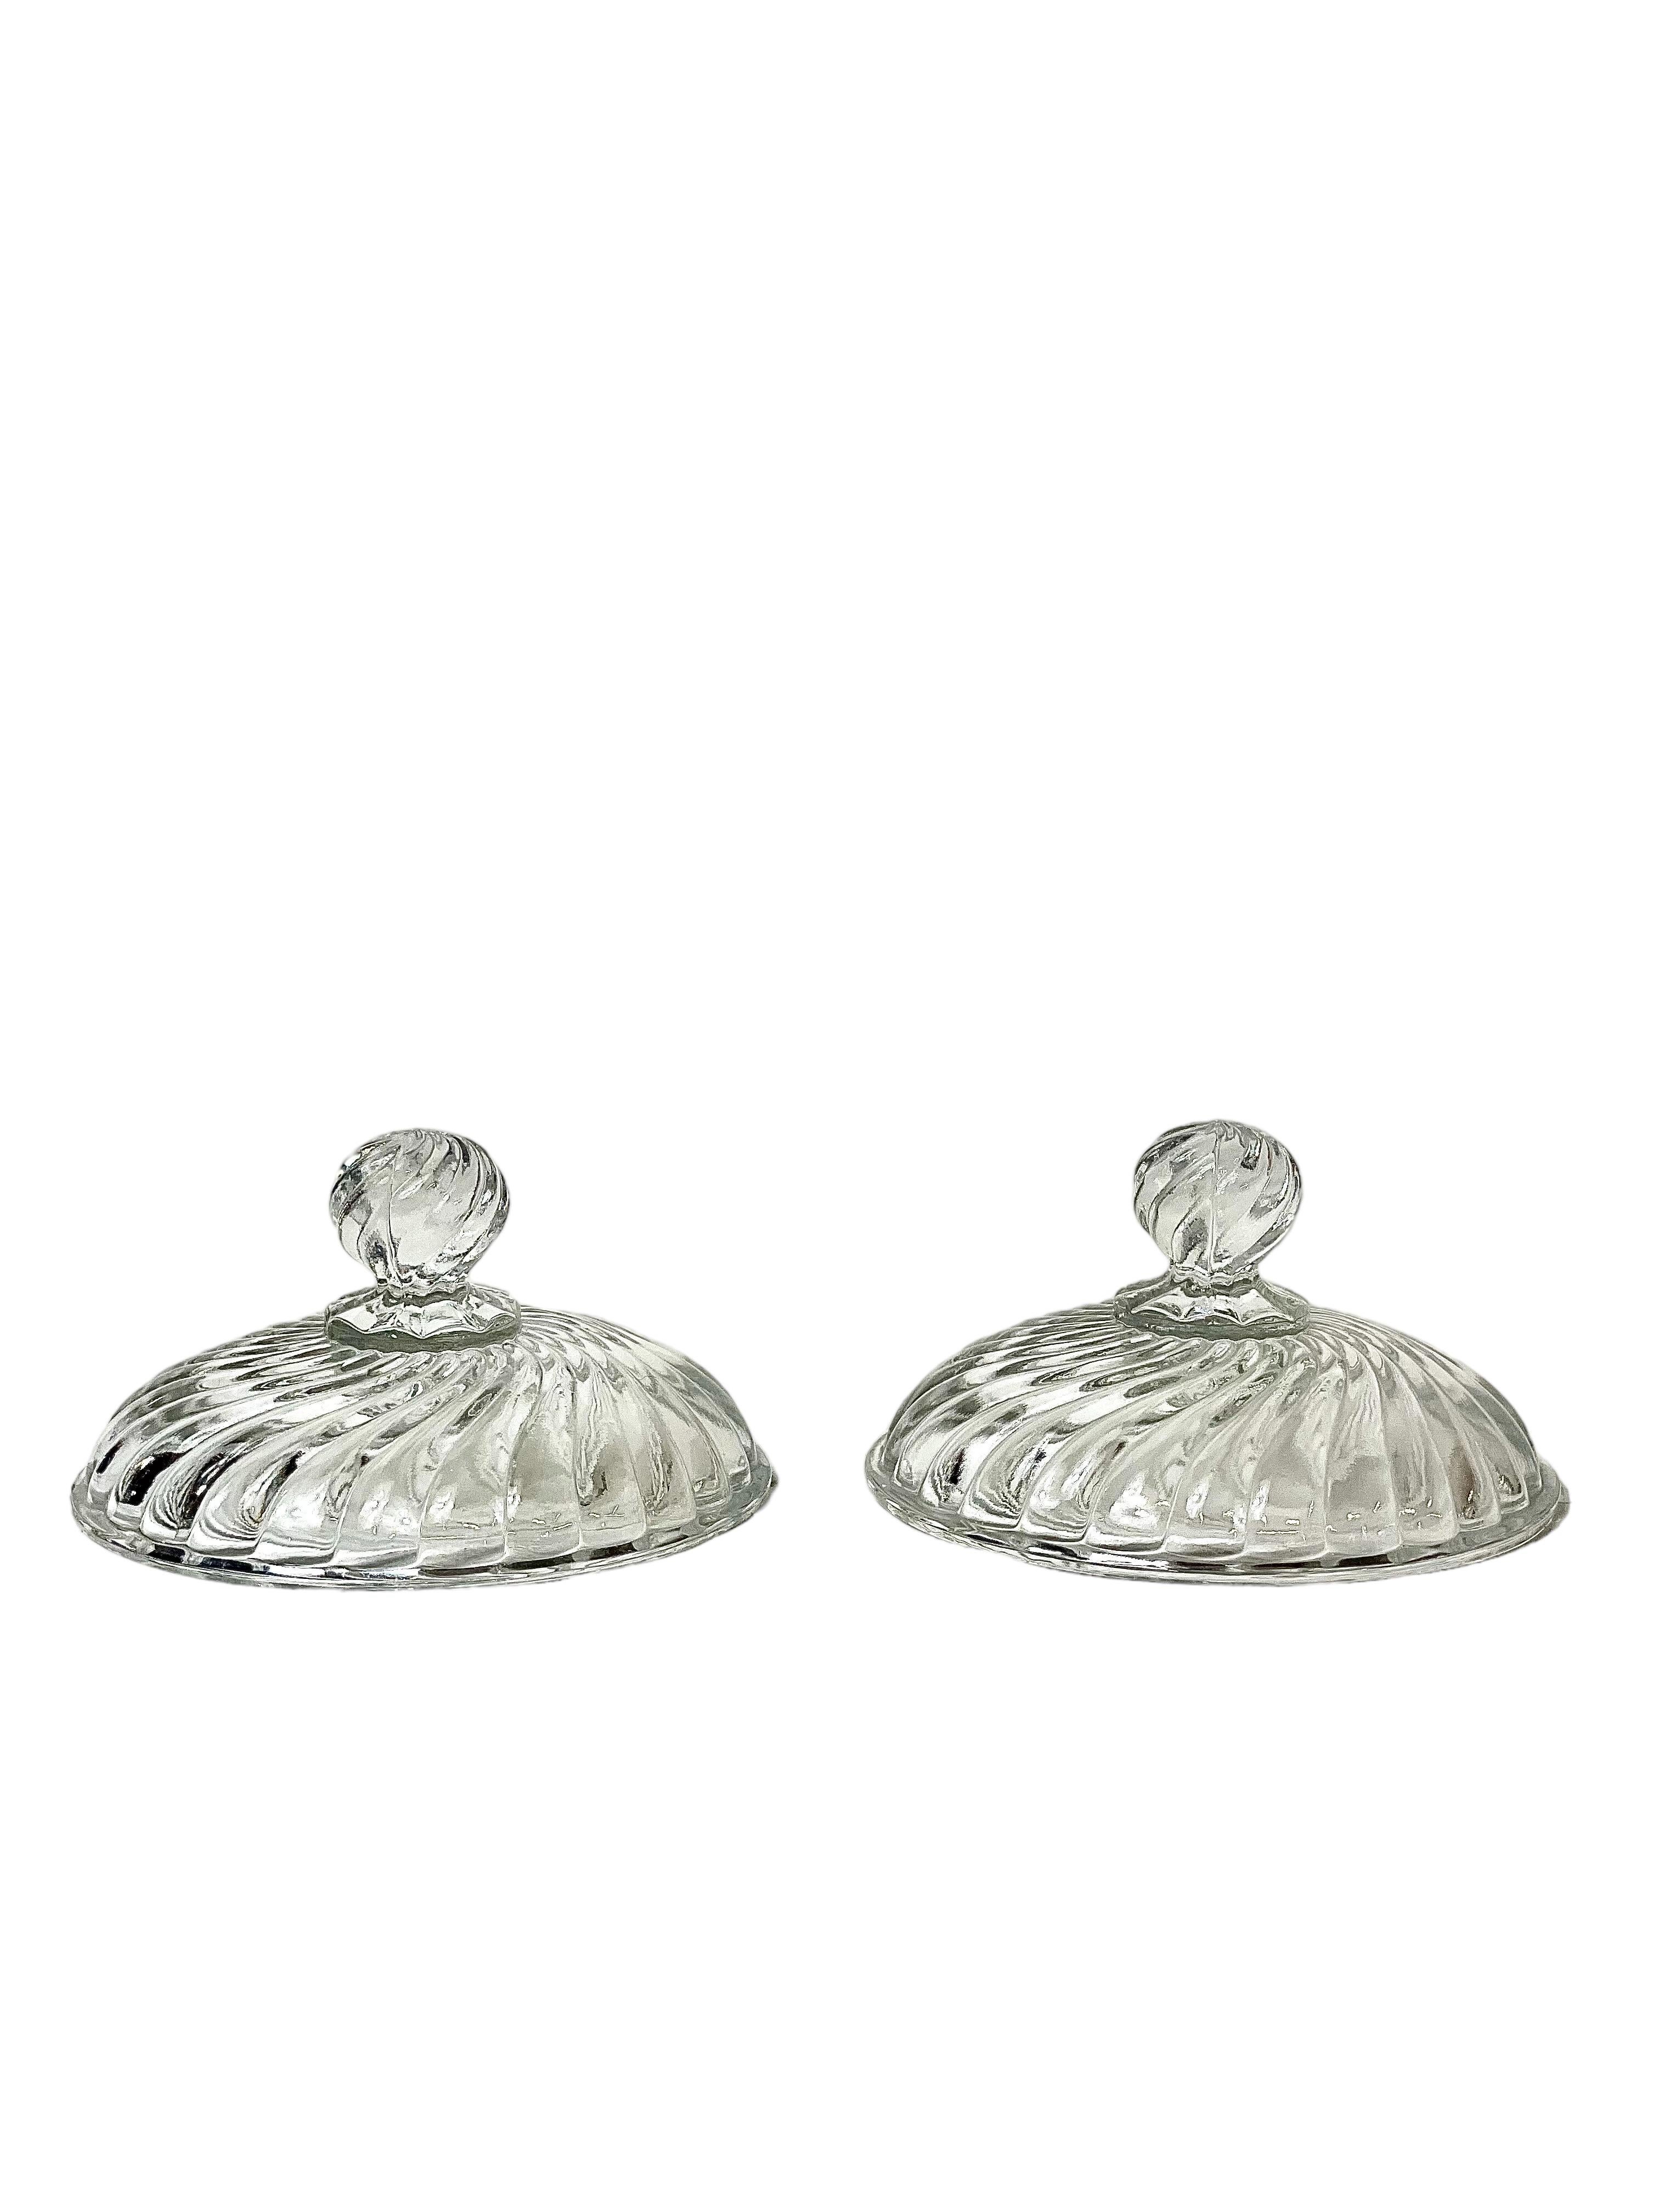 French Baccarat Pair of Crystal Lidded Bonbonnières